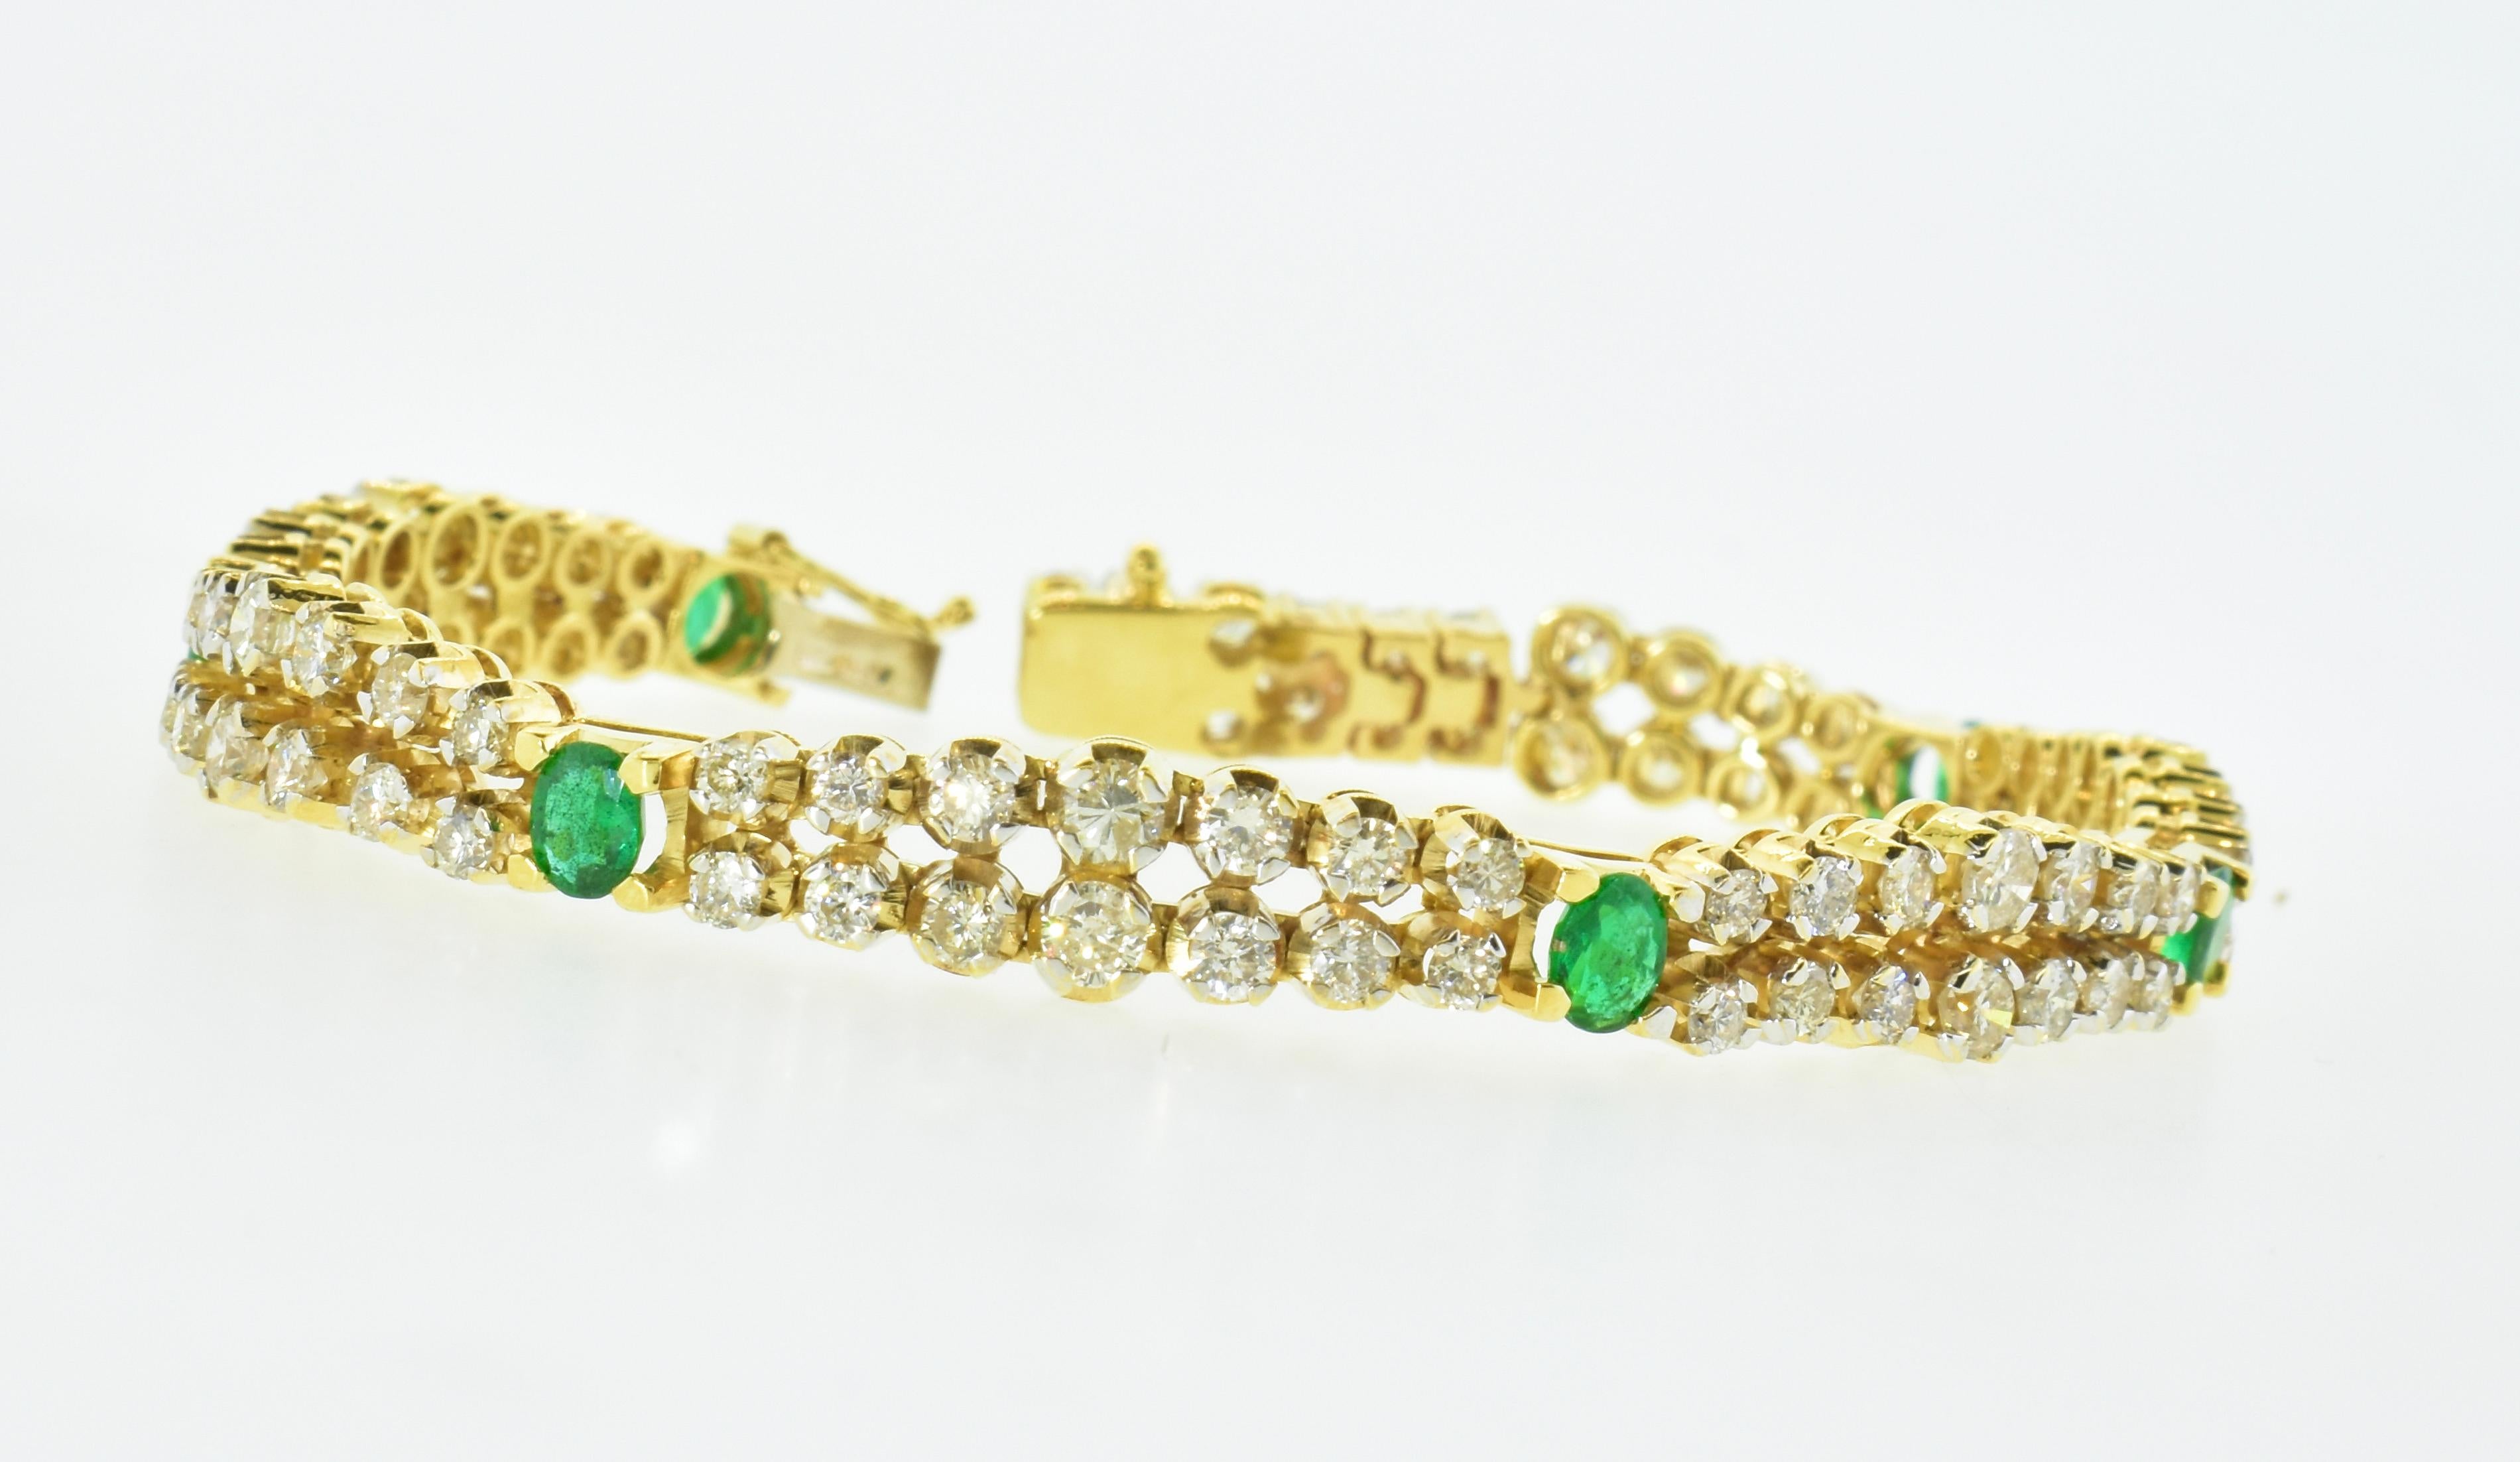 Emerald and diamond bracelet in yellow gold, this flexible bracelet holds 6 oval natural green emeralds weighing approximately 1.25 cts. totally.  There are a total of 90 white diamonds all near colorless (I), and very slightly included to slightly